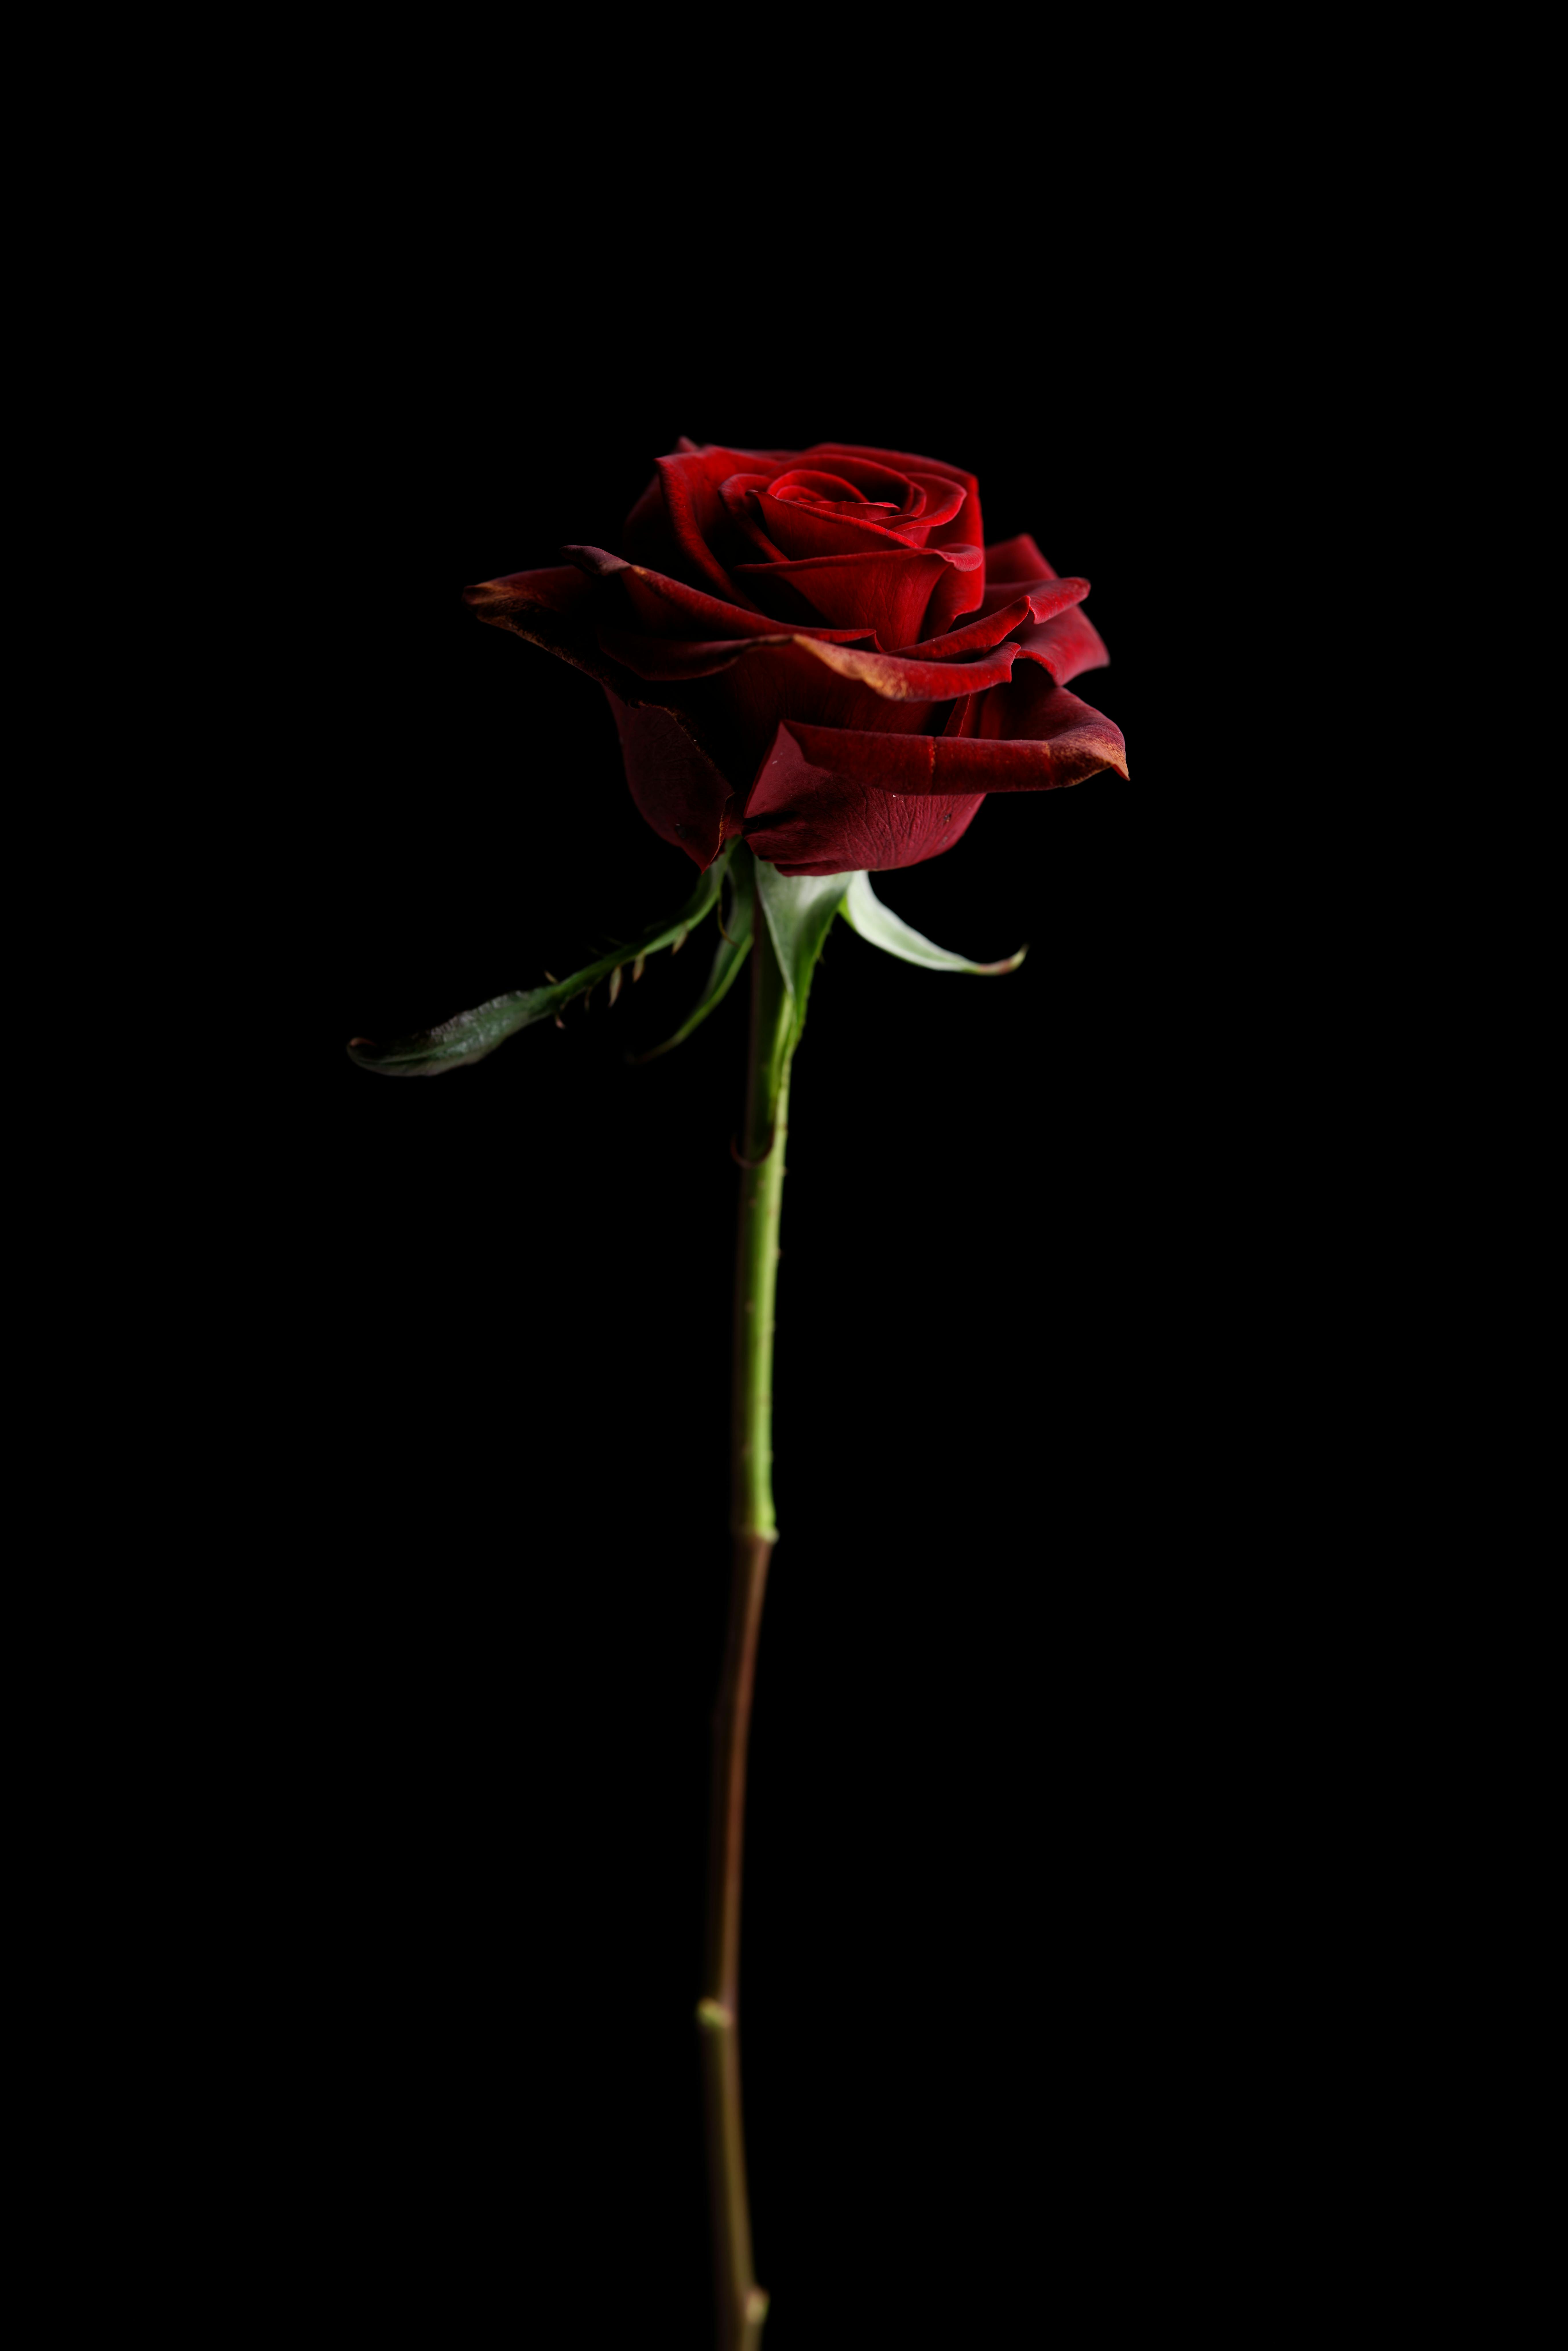 Red Rose in Black Background · Free Stock Photo